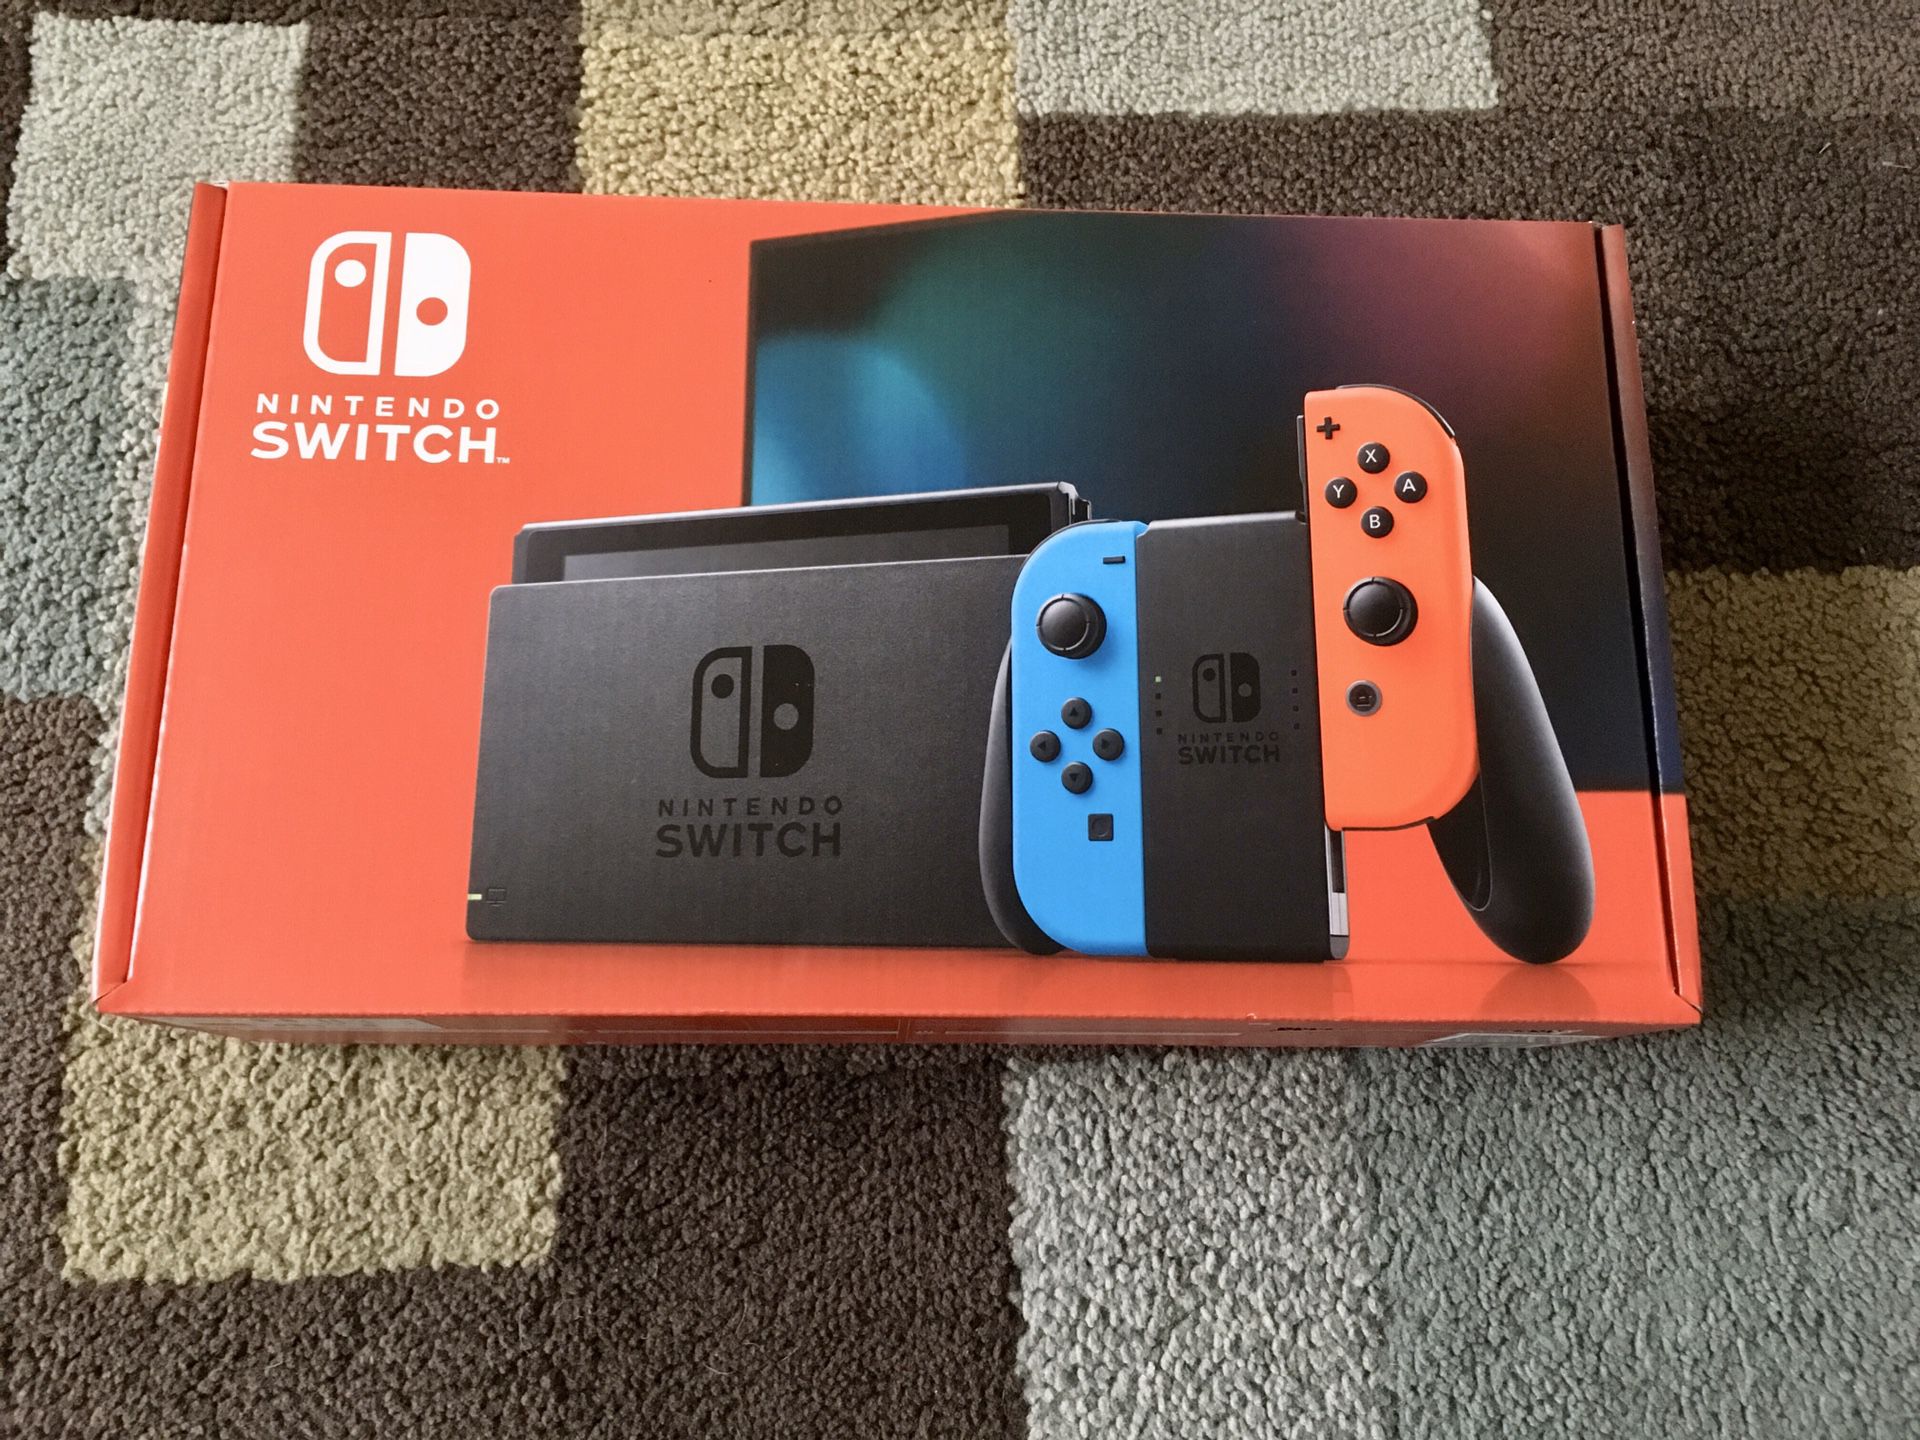 Nintendo Switch. Brand new in hand never opened. Ready to be yours. $380 cash no trades.